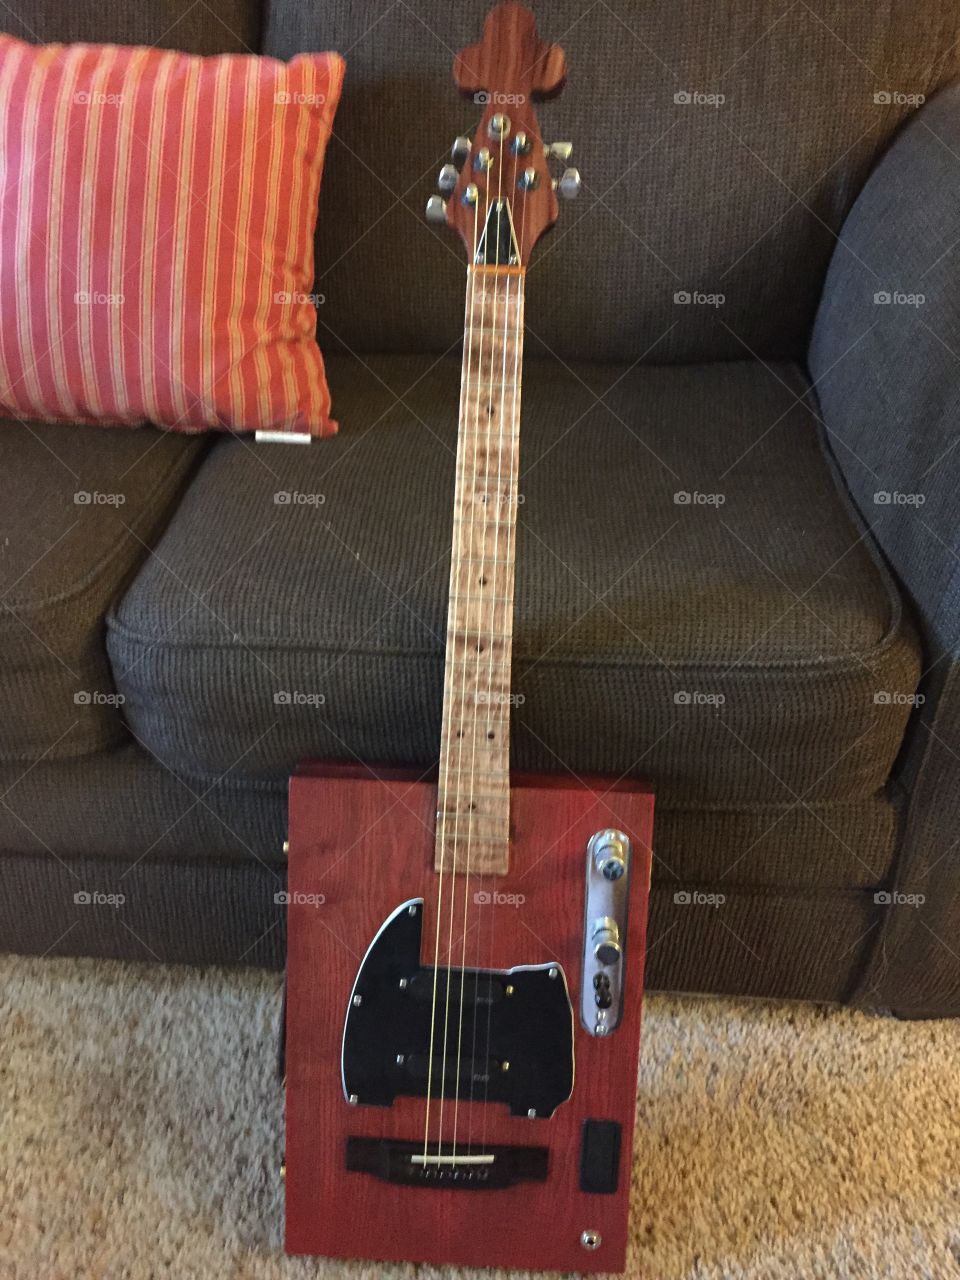 Five string handmade wooden red stained with telecaster volume control emf pickups battery powered with acoustic guitar bridge. Delightful!